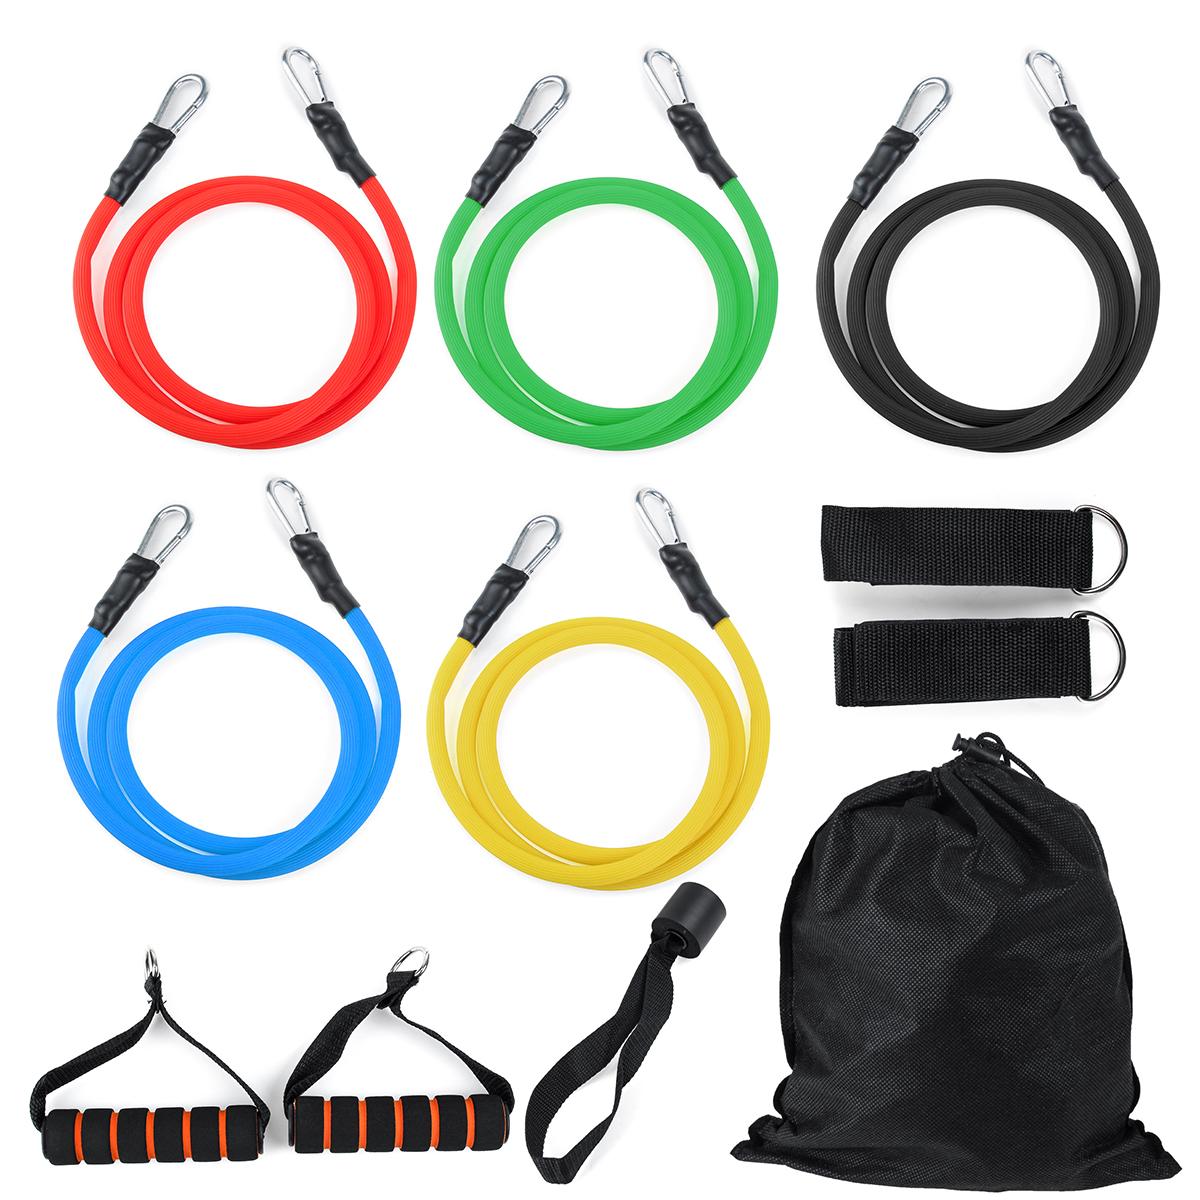 11PCS-Resistance-Bands-Set-Home-Fitness-Exercise-Straps-Gym-Training-Strength-Pull-Tubes-1697116-7